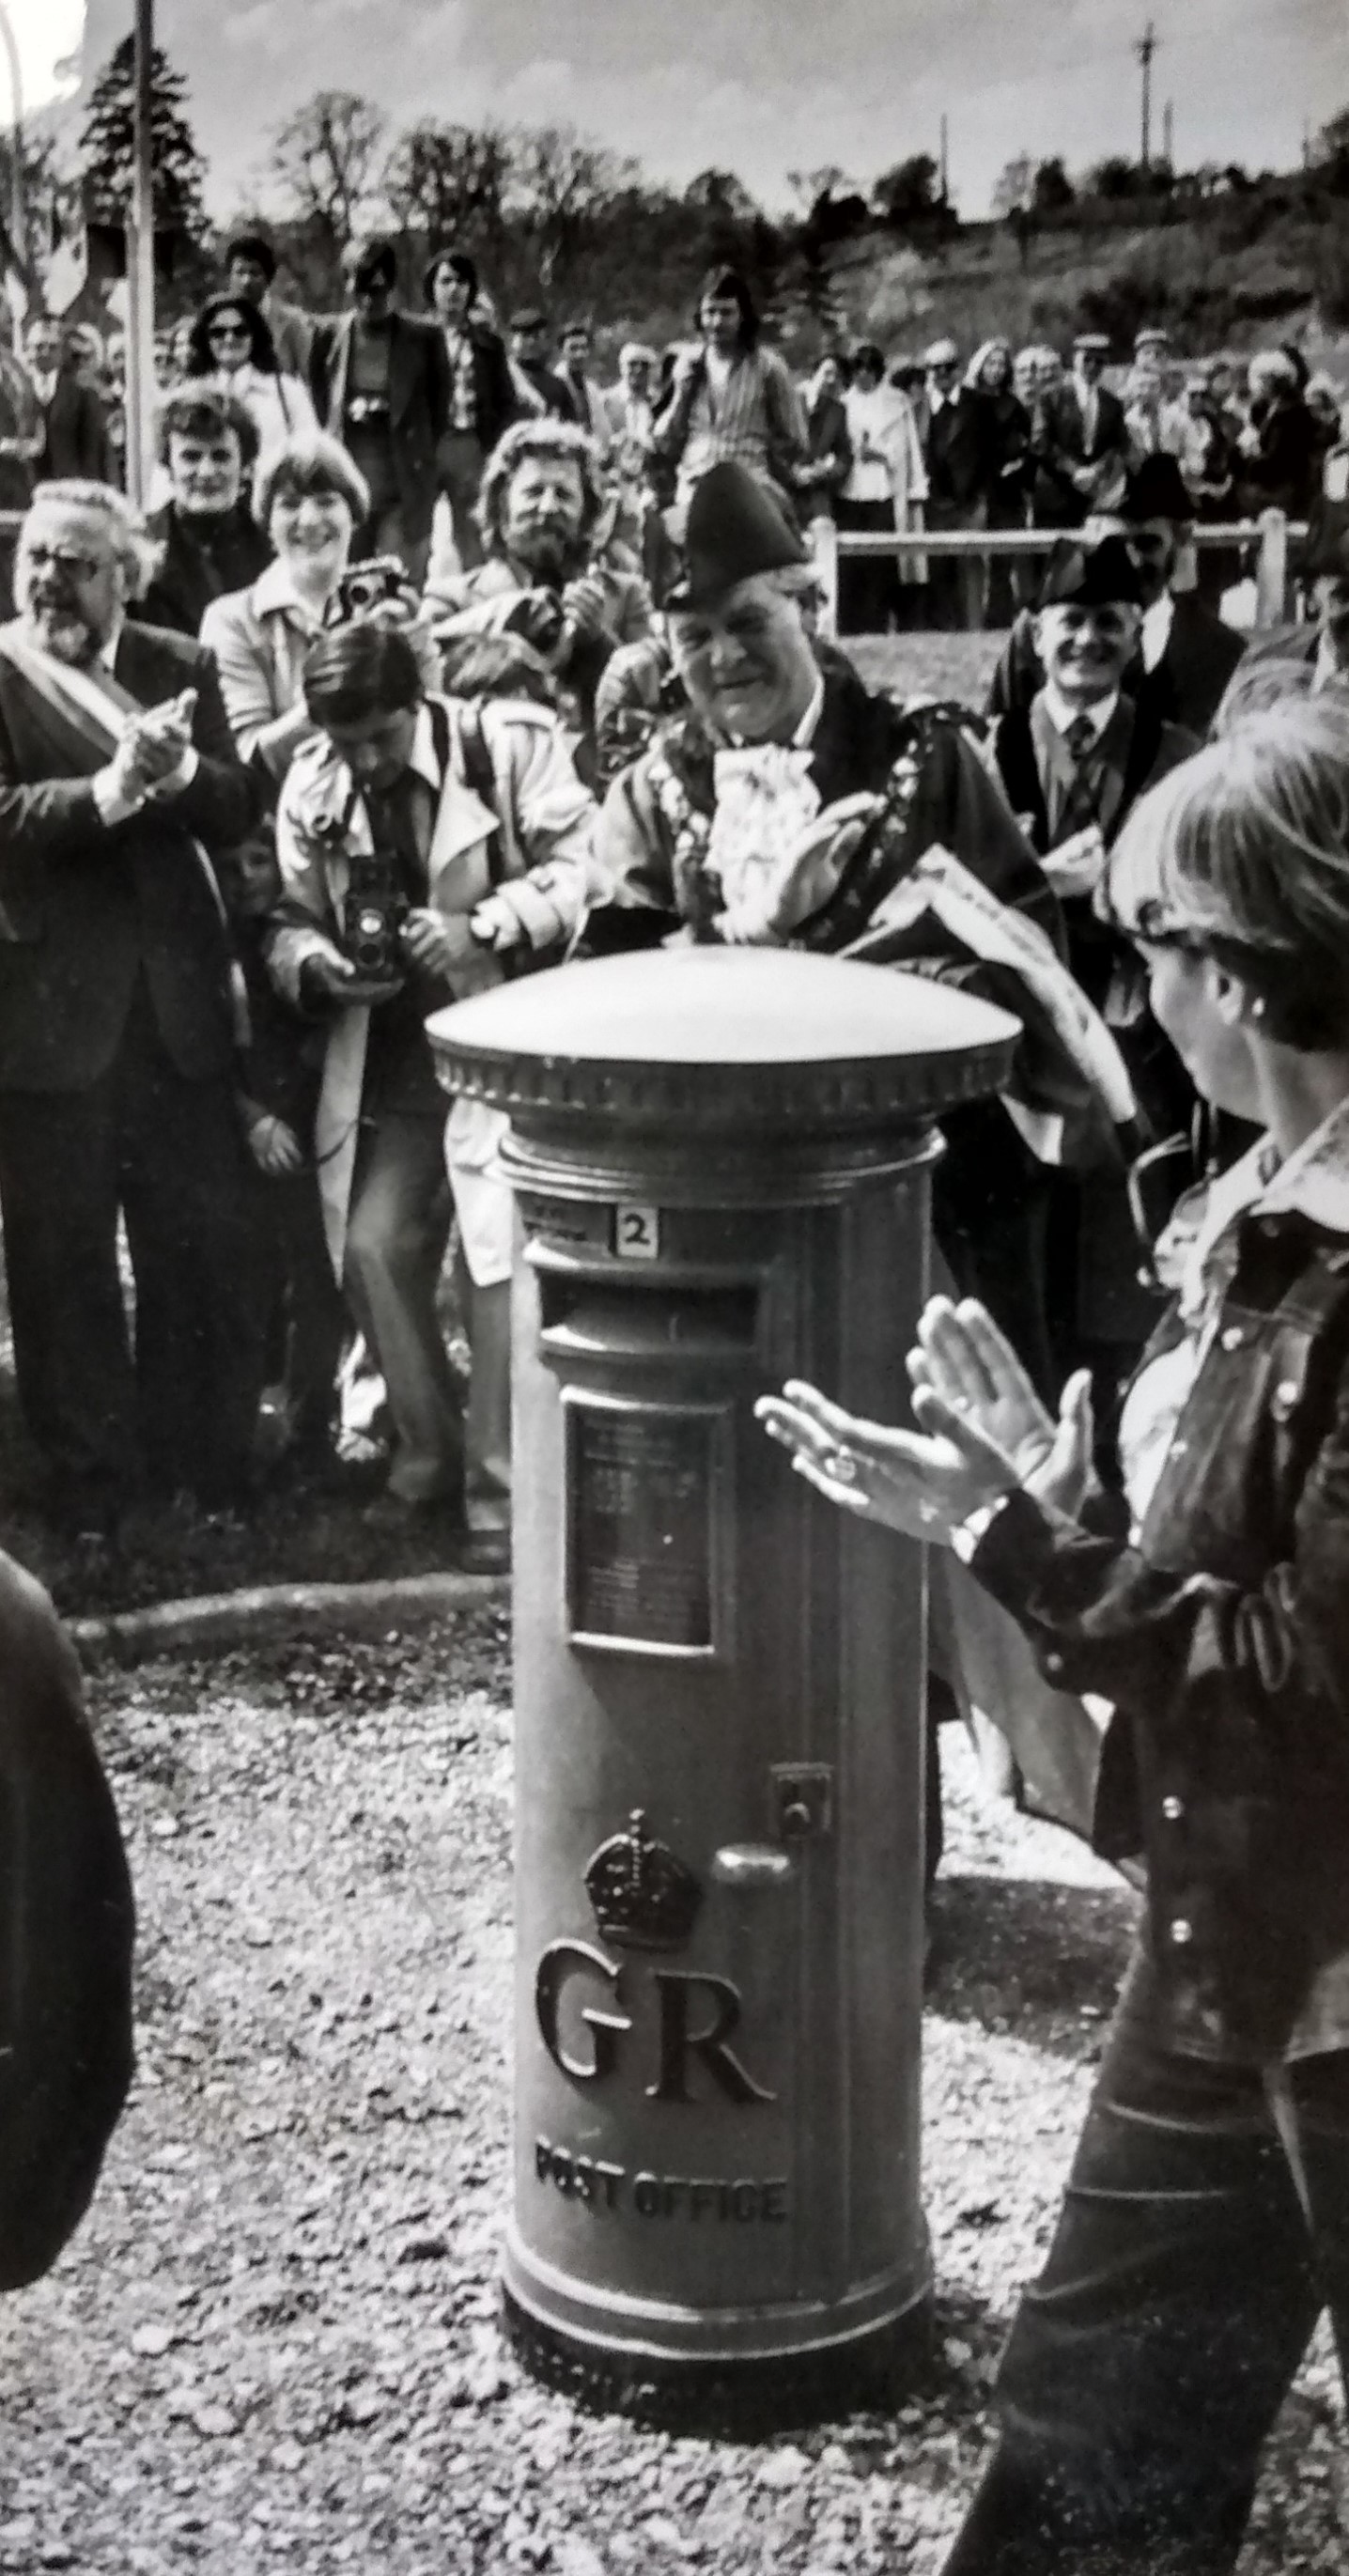  May 1978 saw a “typically English” pillar box being unveiled in Evesham Square, Dreux